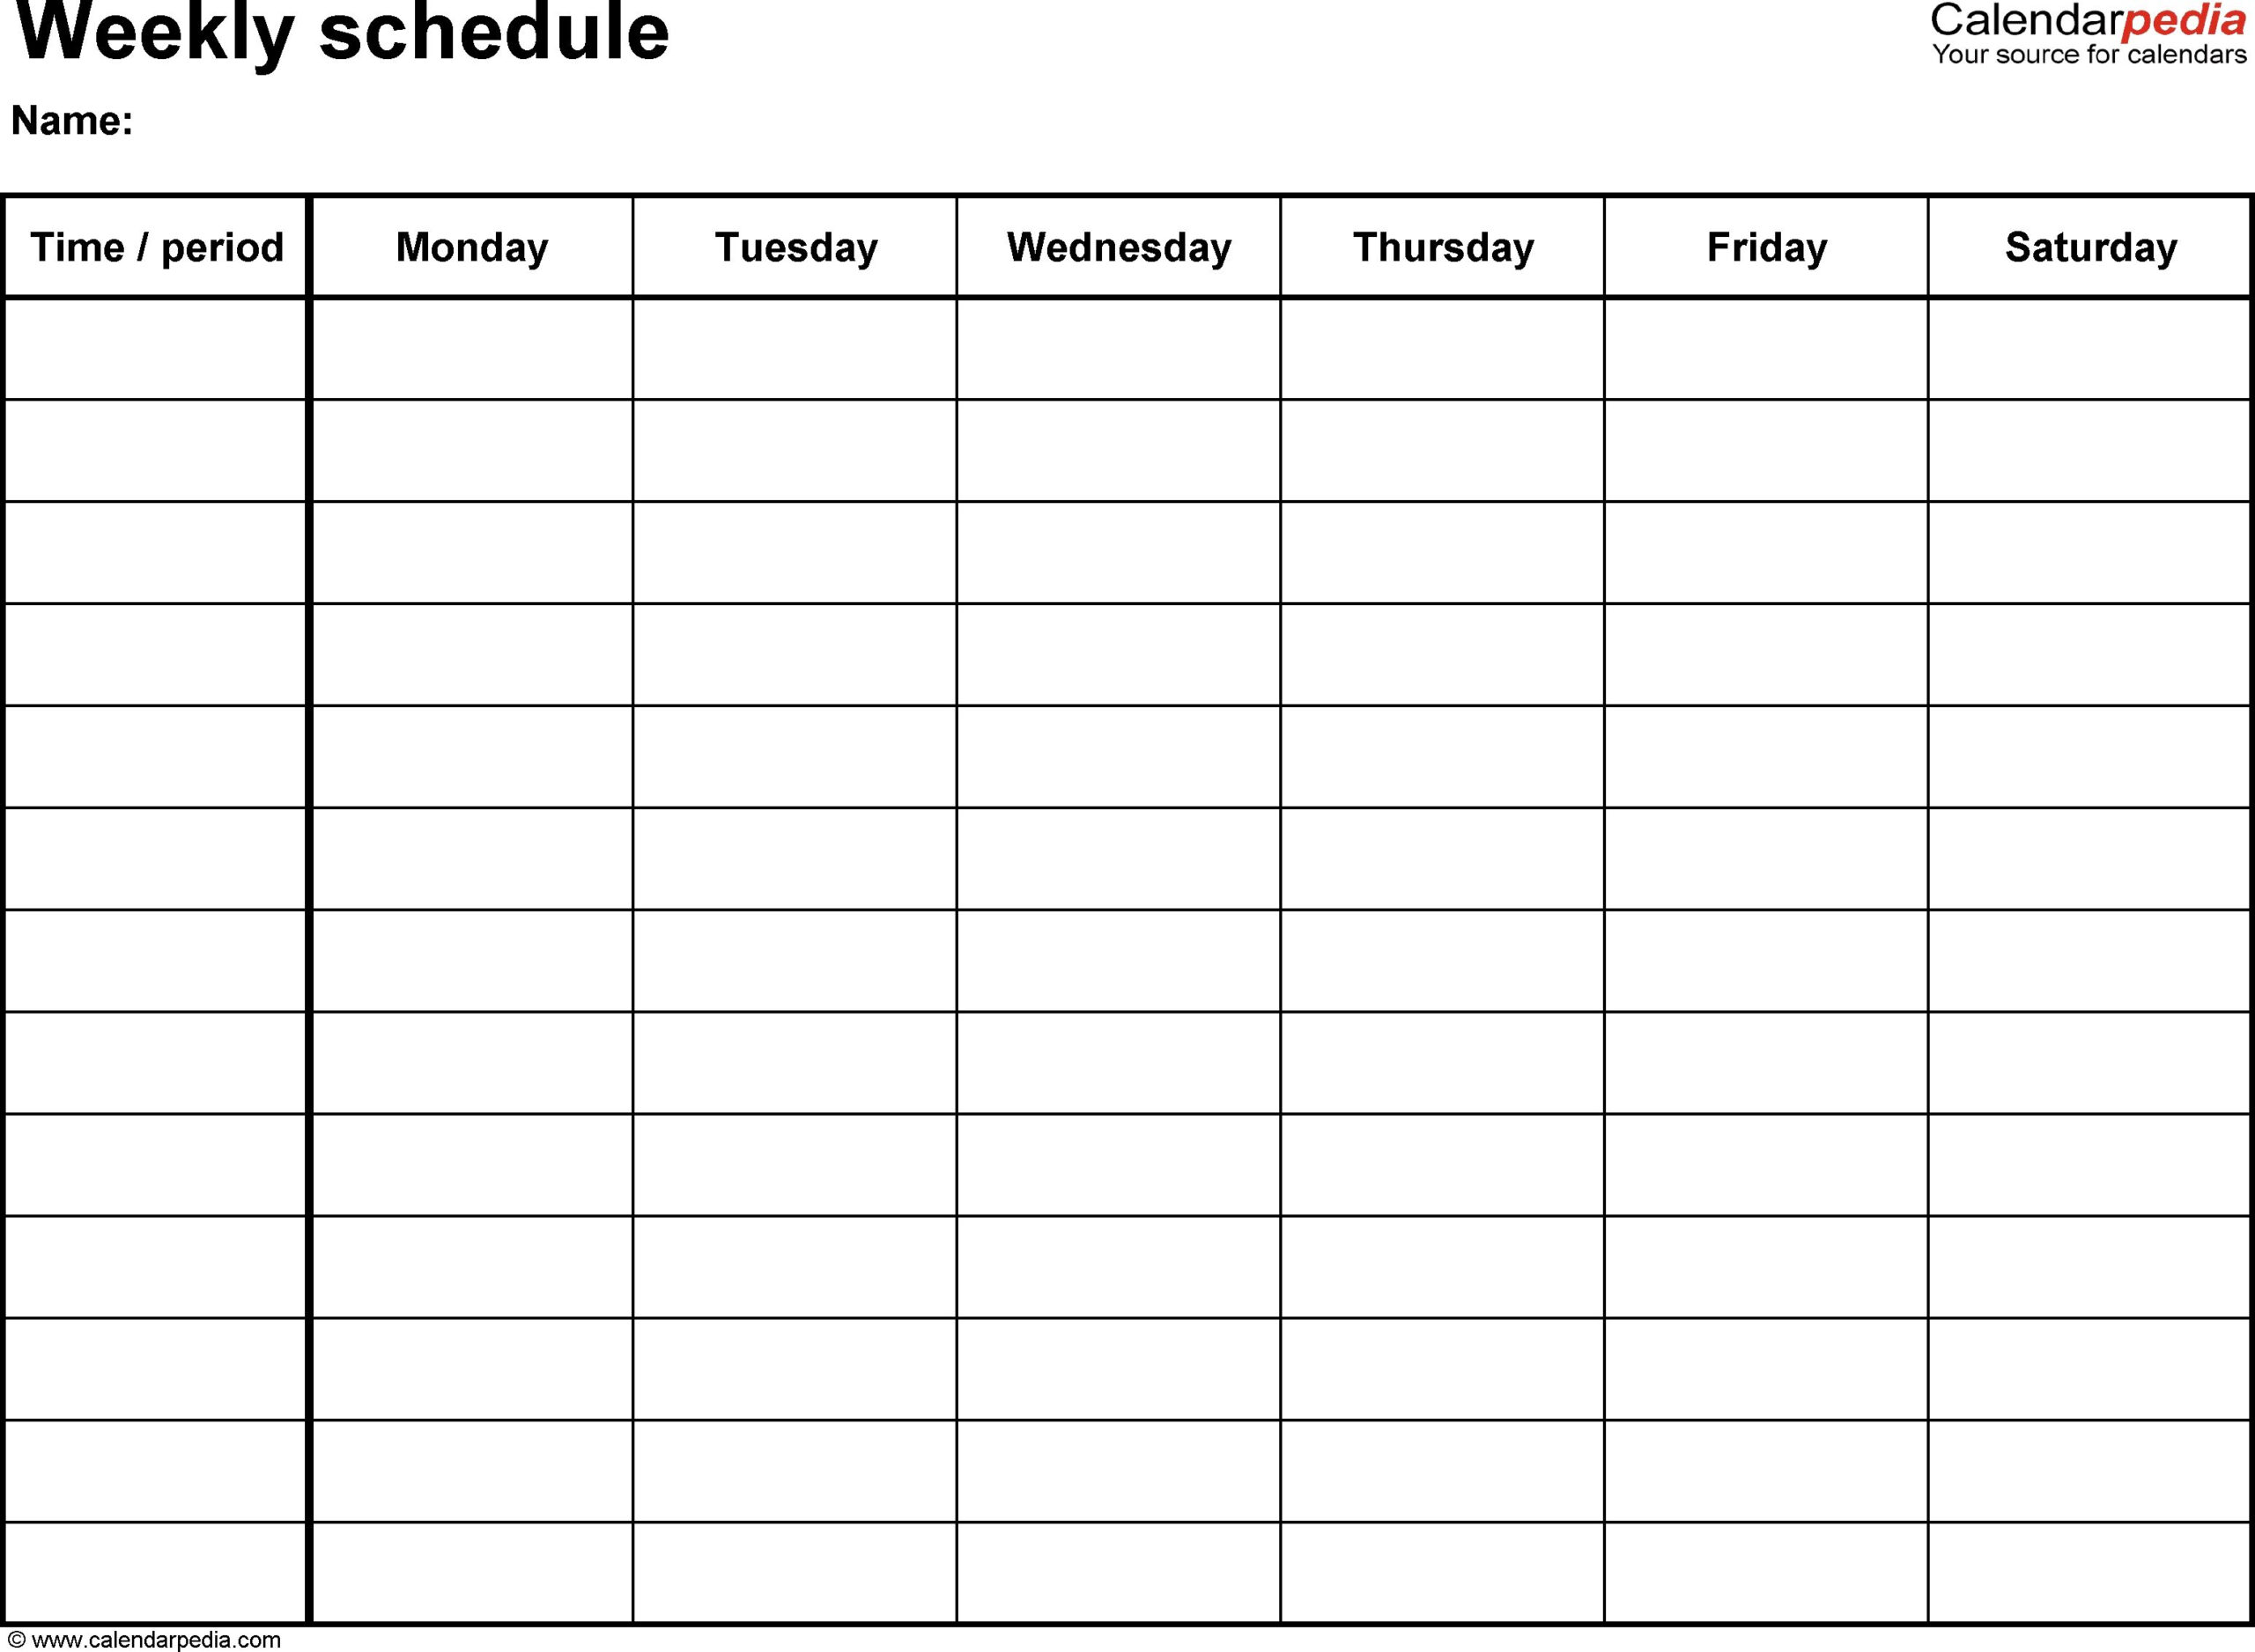 Fillable Weekly Calendar Printable Weekly Calendar With 15 with regard to Weekly Planner With Time Slots Template